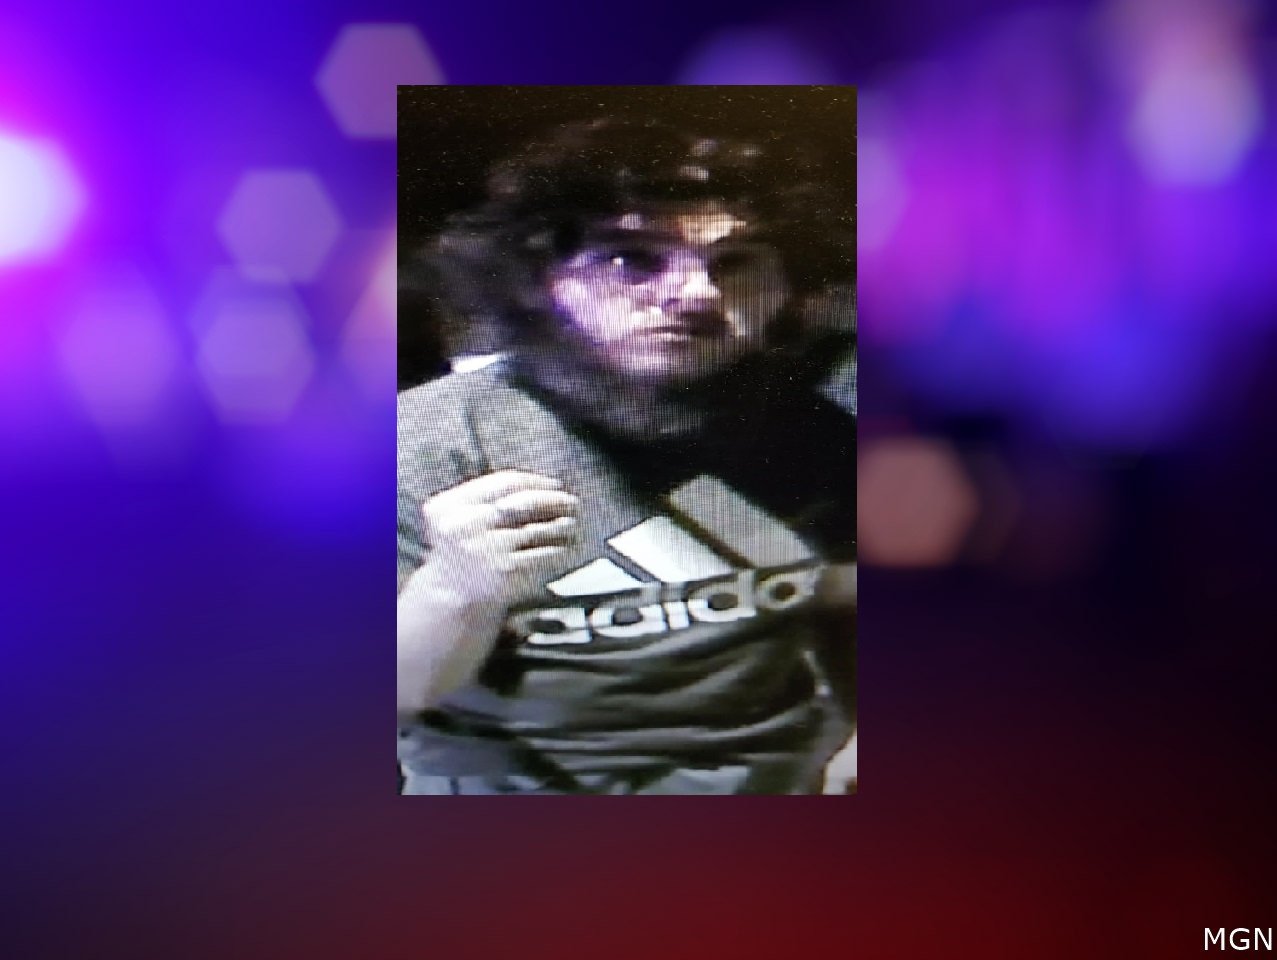 Nebraska State Patrol searching for man who could be in danger